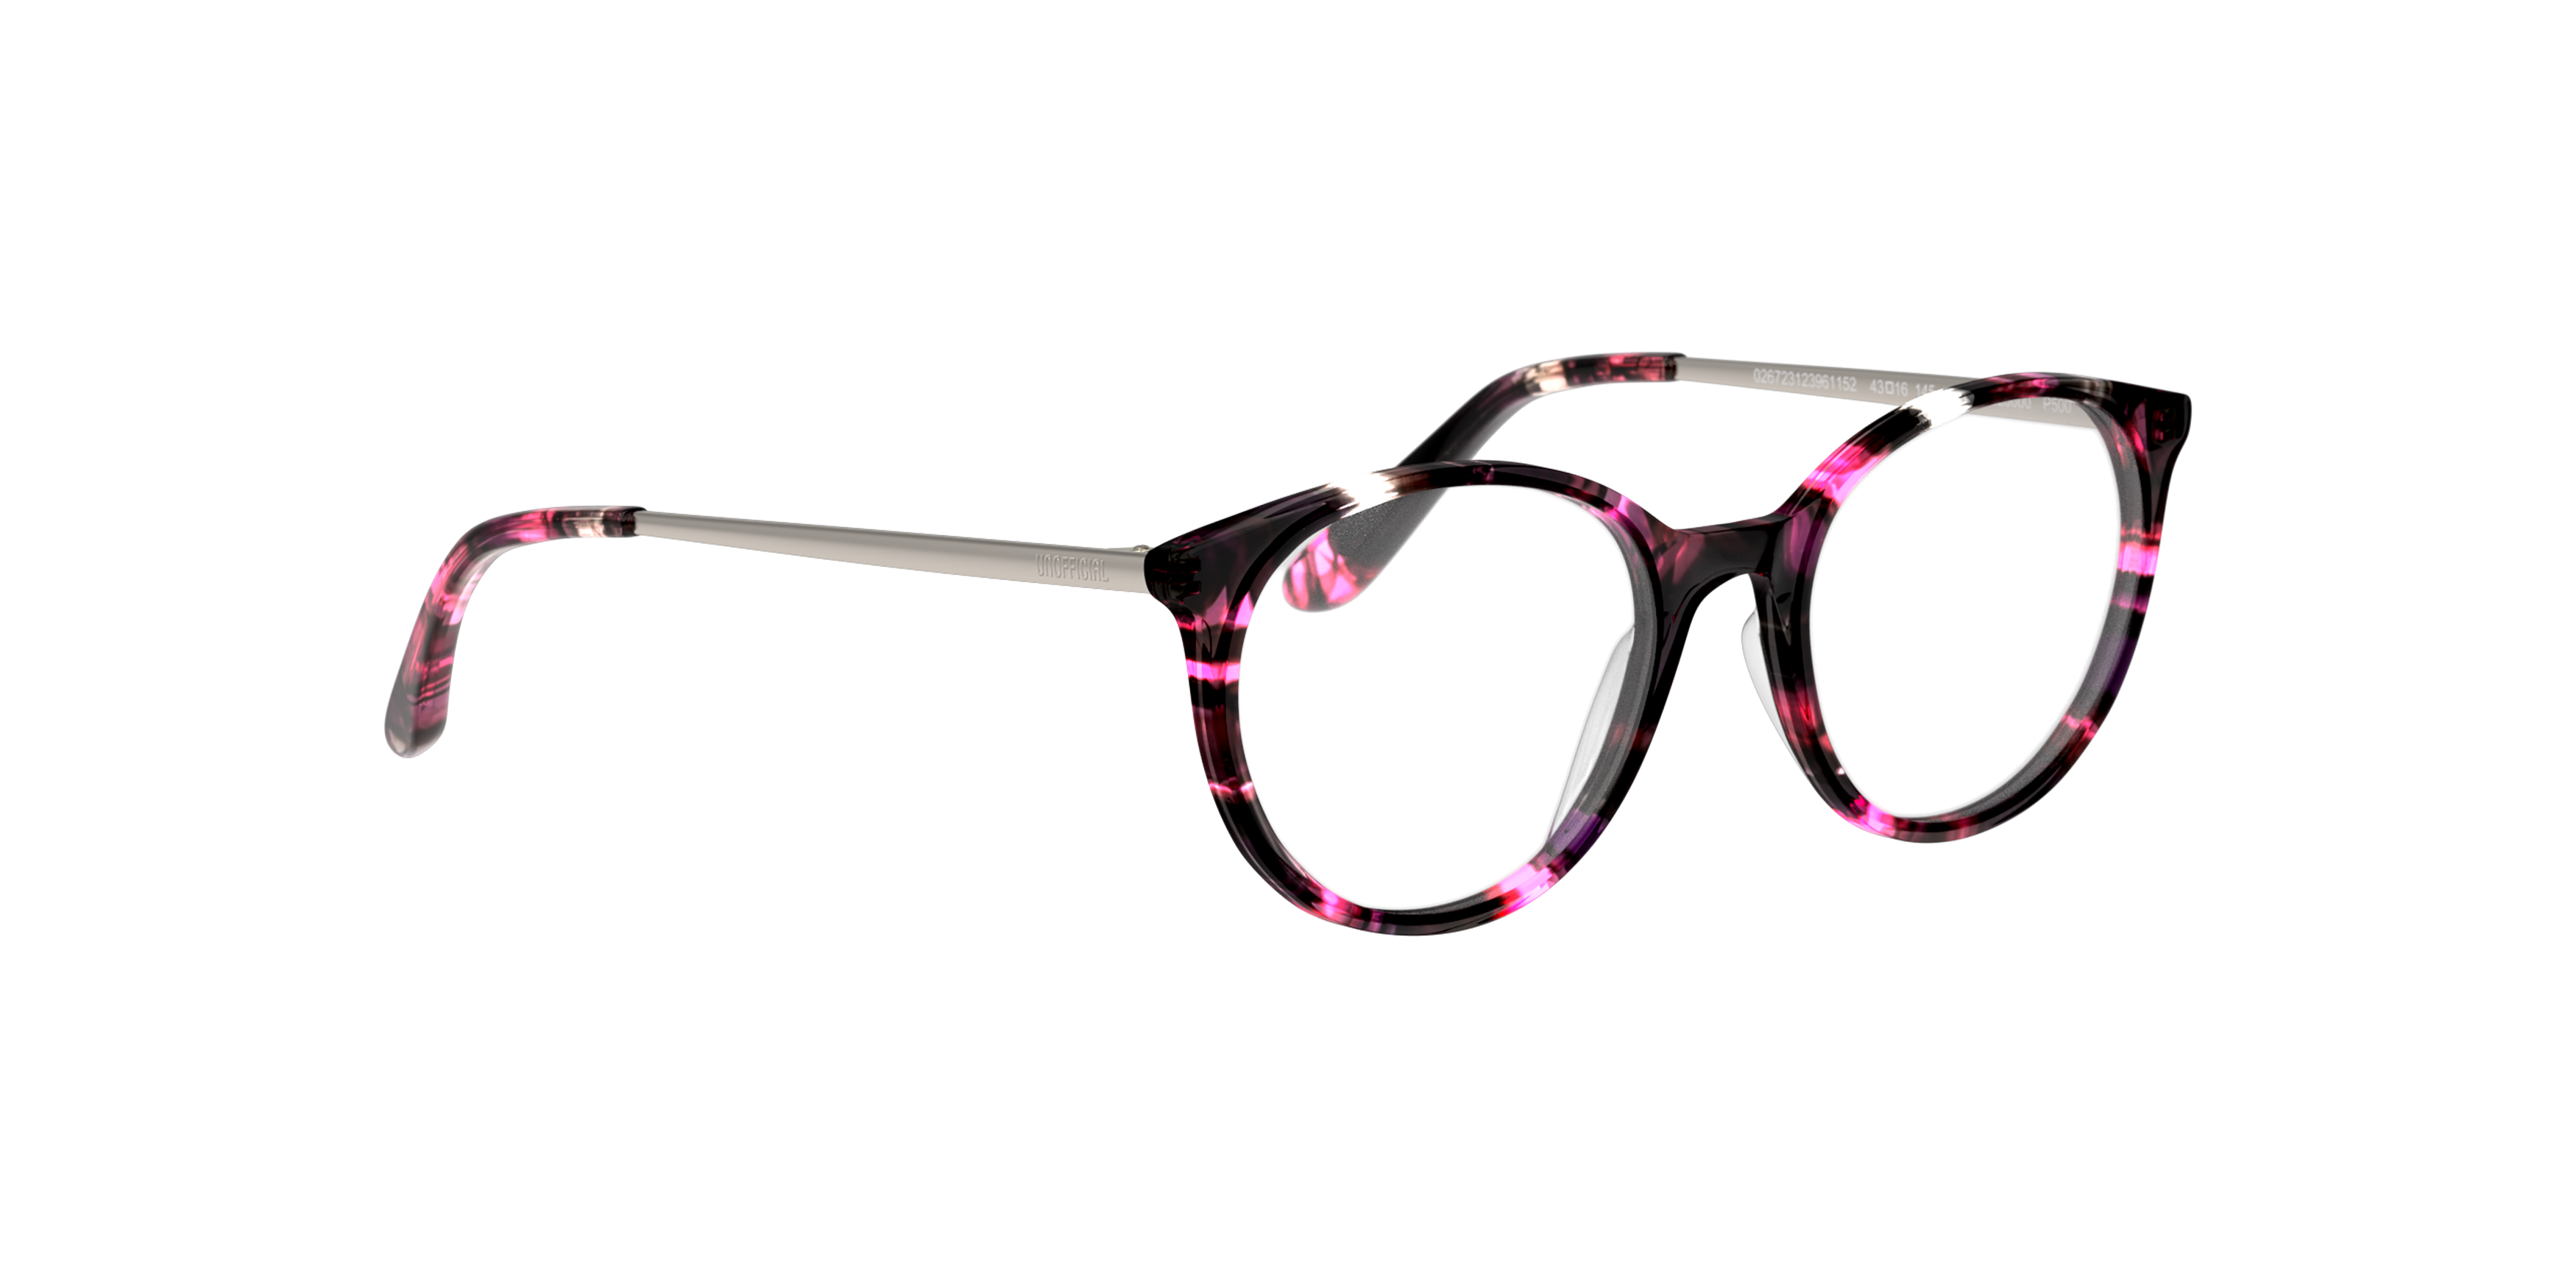 Angle_Right01 Unofficial UNOF0030 Glasses Transparent / Pink